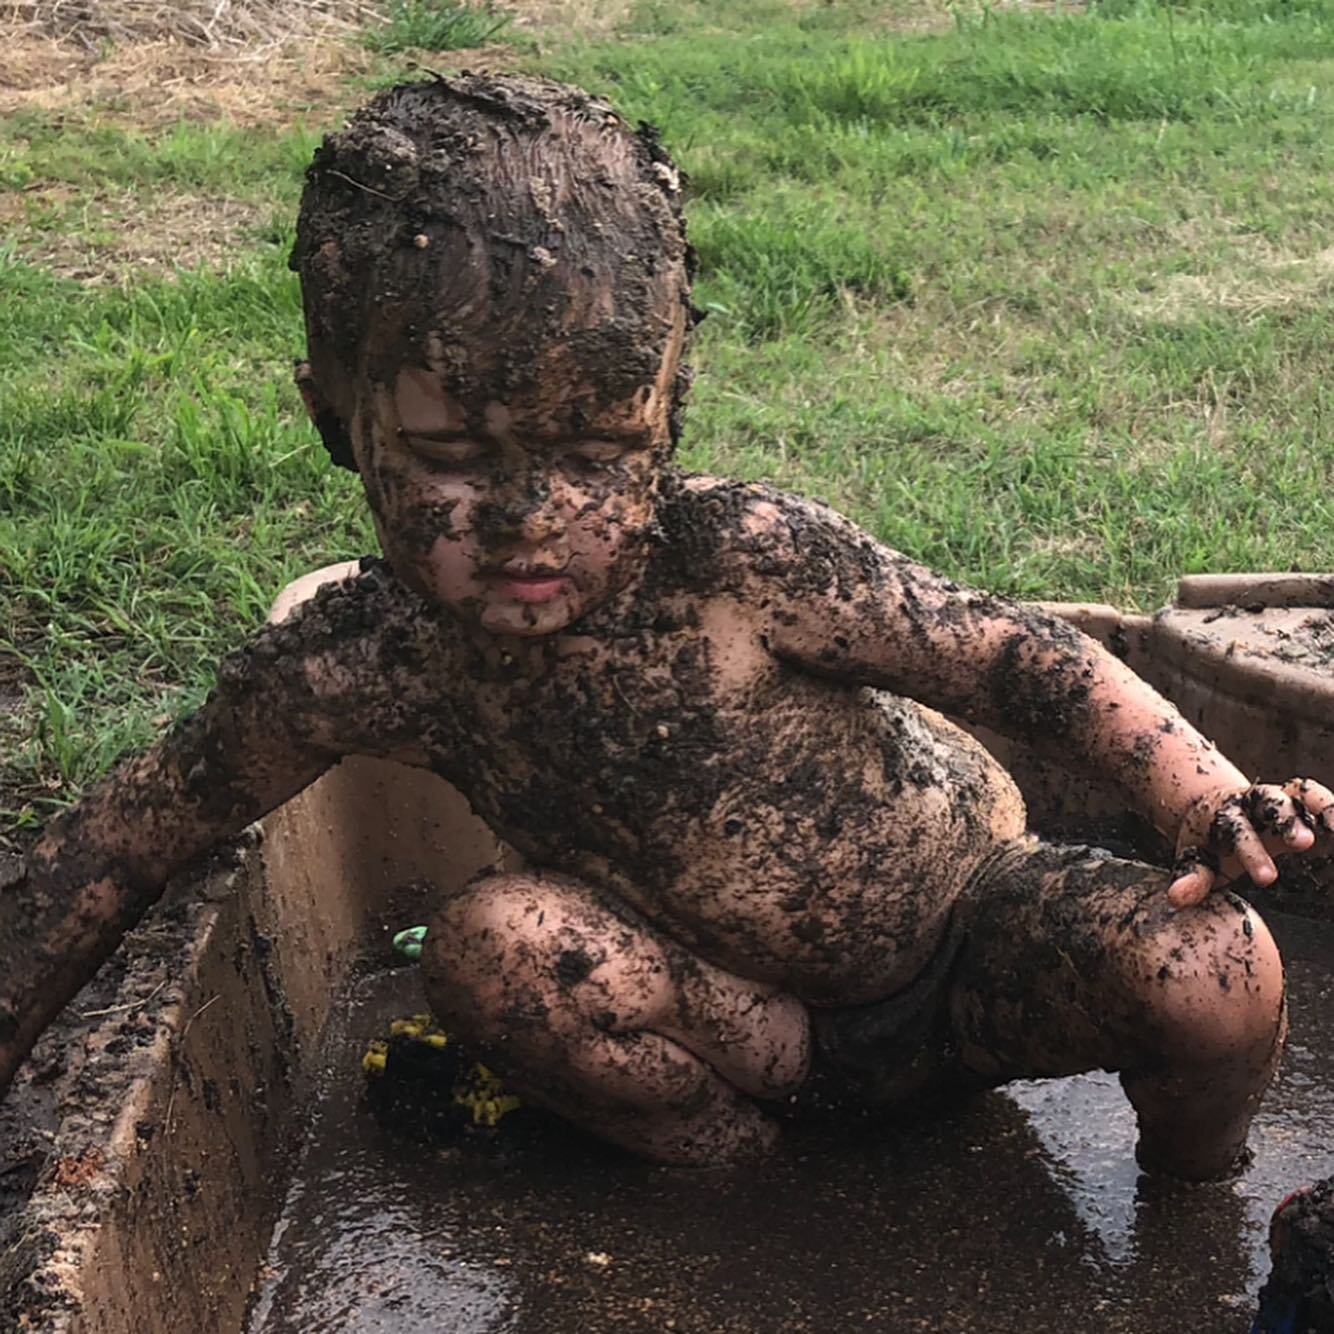 Turned our sand box into a mud box!  Figured kids just want to get dirty anyway so might as well lean into it. 
#fatherhoodfitnessfinance#fitness#fitfam#fitfamily#dad#father#family#familytime#dadmode#dadlife#married#marriage#happilymarried#beardgame#